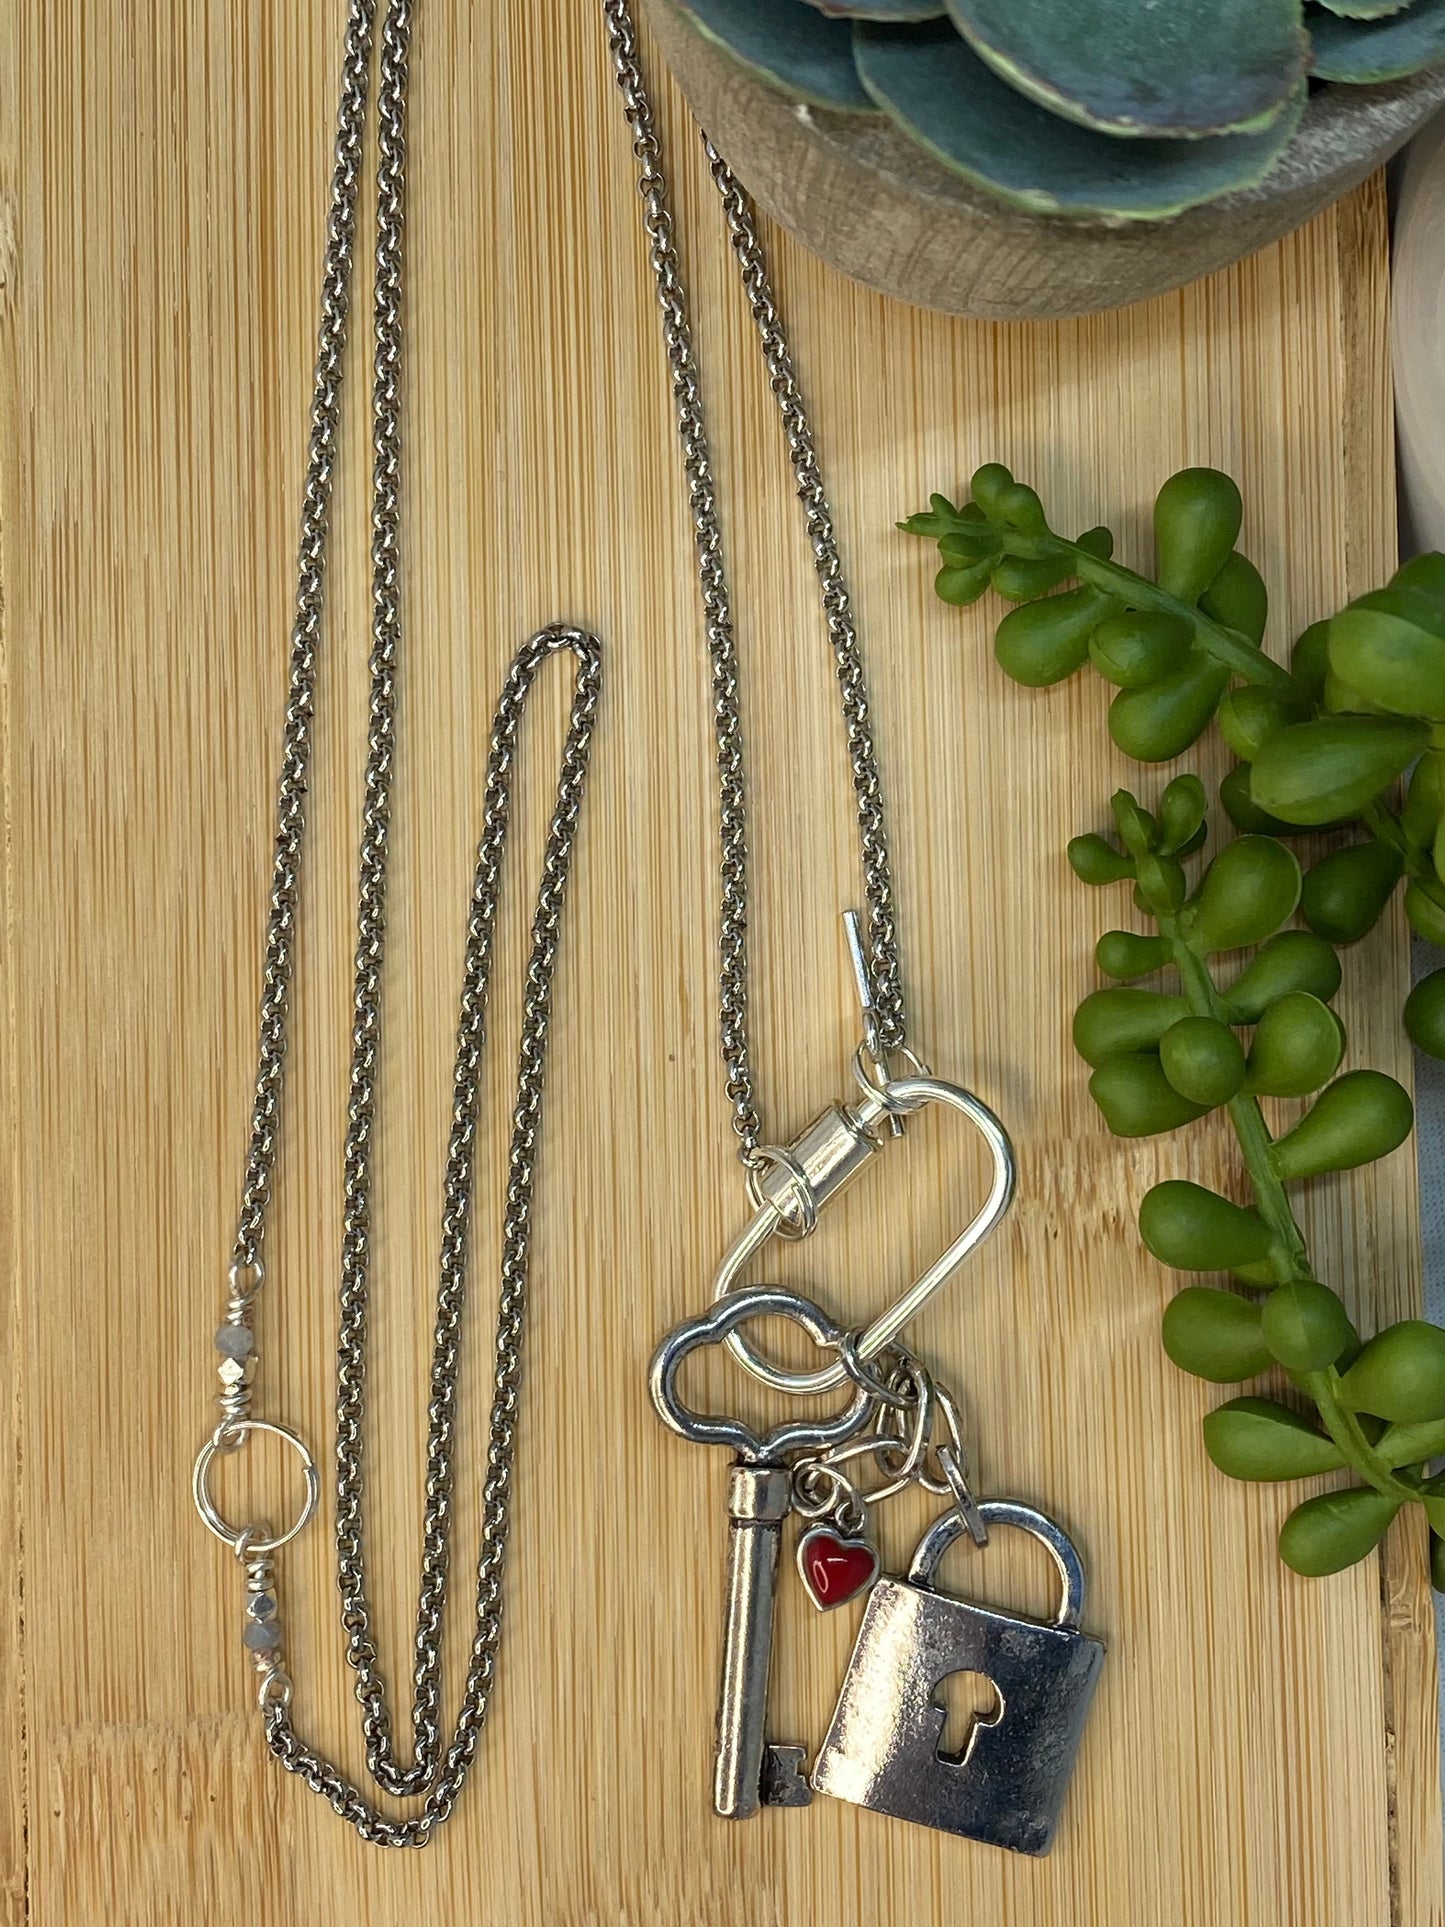 Necklace - 36” Adjustable - Key to My Heart, Sterling Silver Red Jasper accent on a Stainless Steel rolo chain